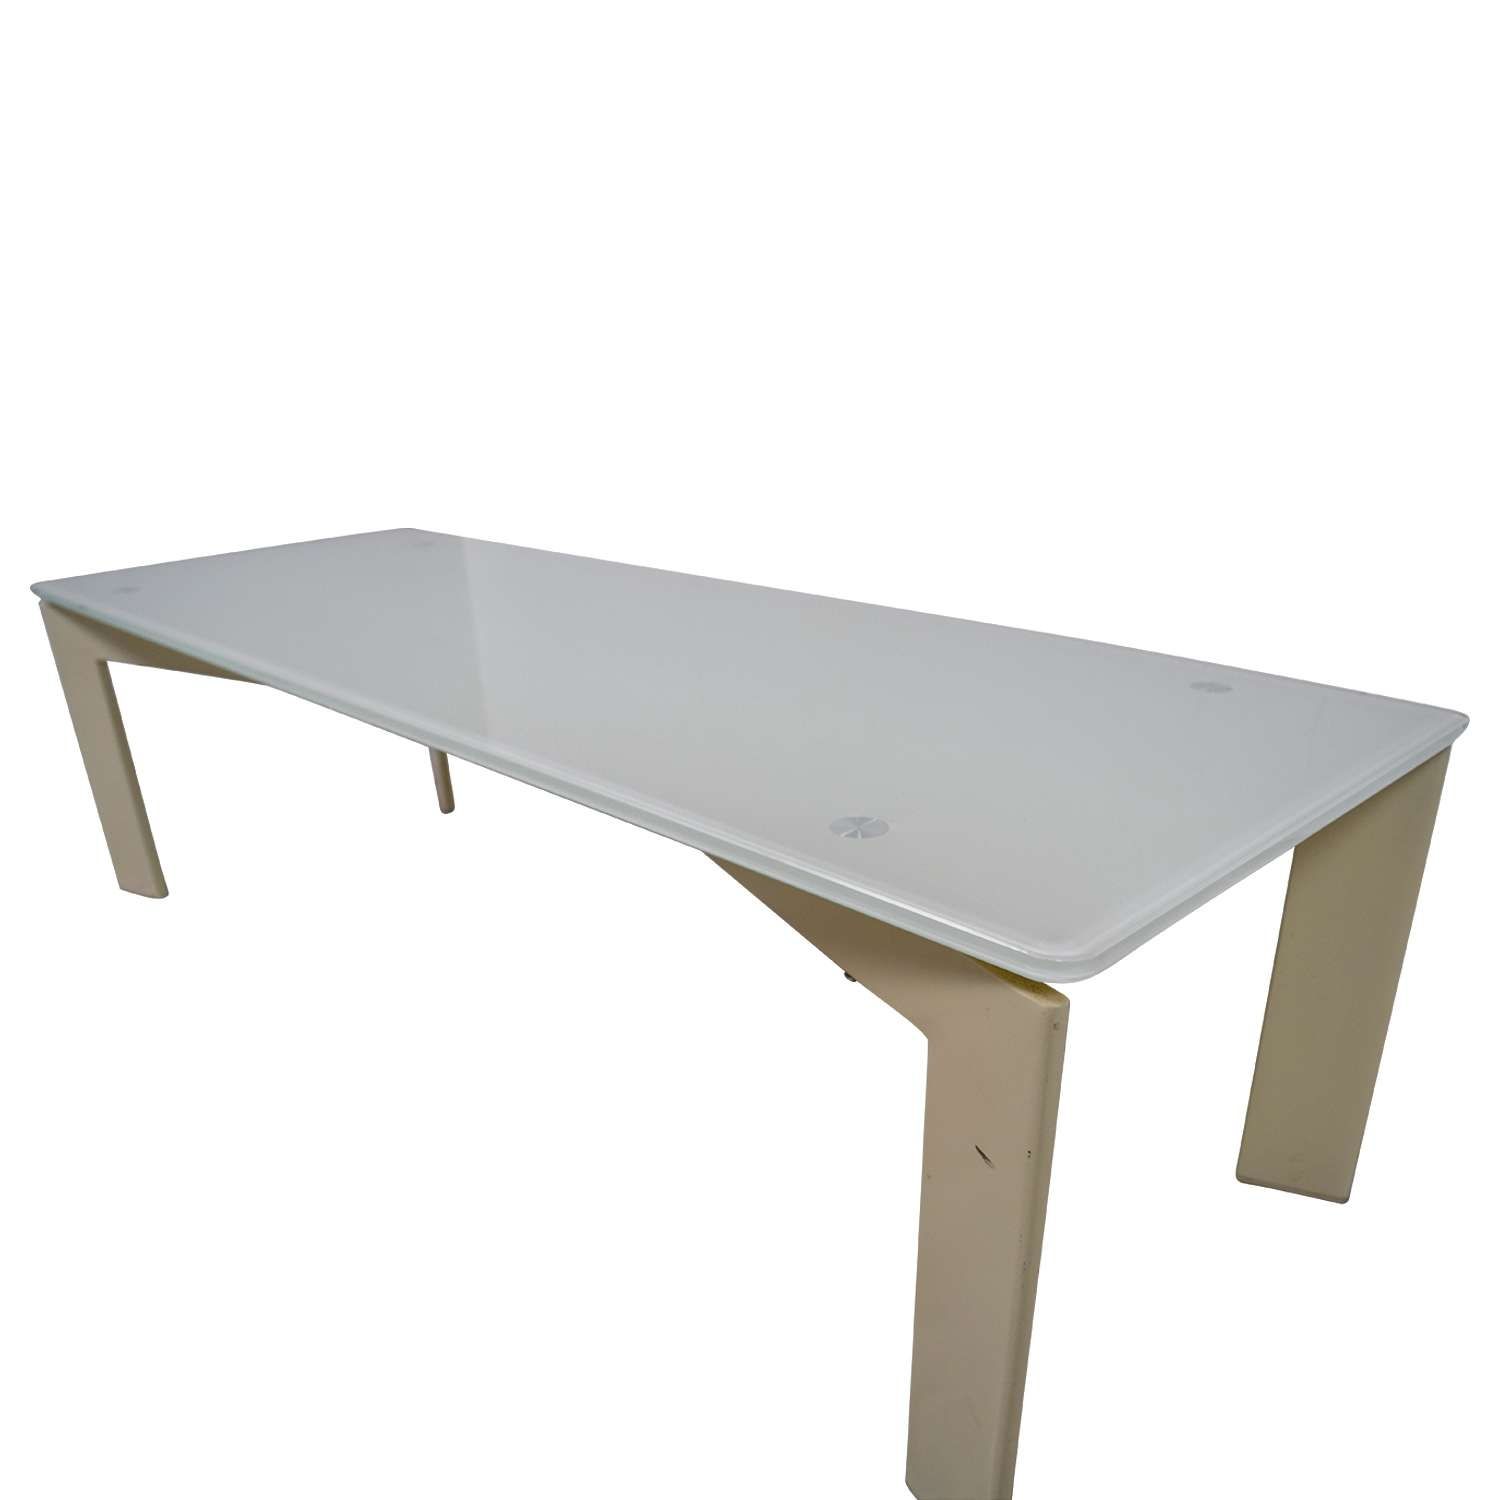 [%preferred Beige Coffee Tables In 50% Off – White And Beige Coffee Table / Tables|50% Off – White And Beige Coffee Table / Tables For Popular Beige Coffee Tables%] (View 11 of 20)